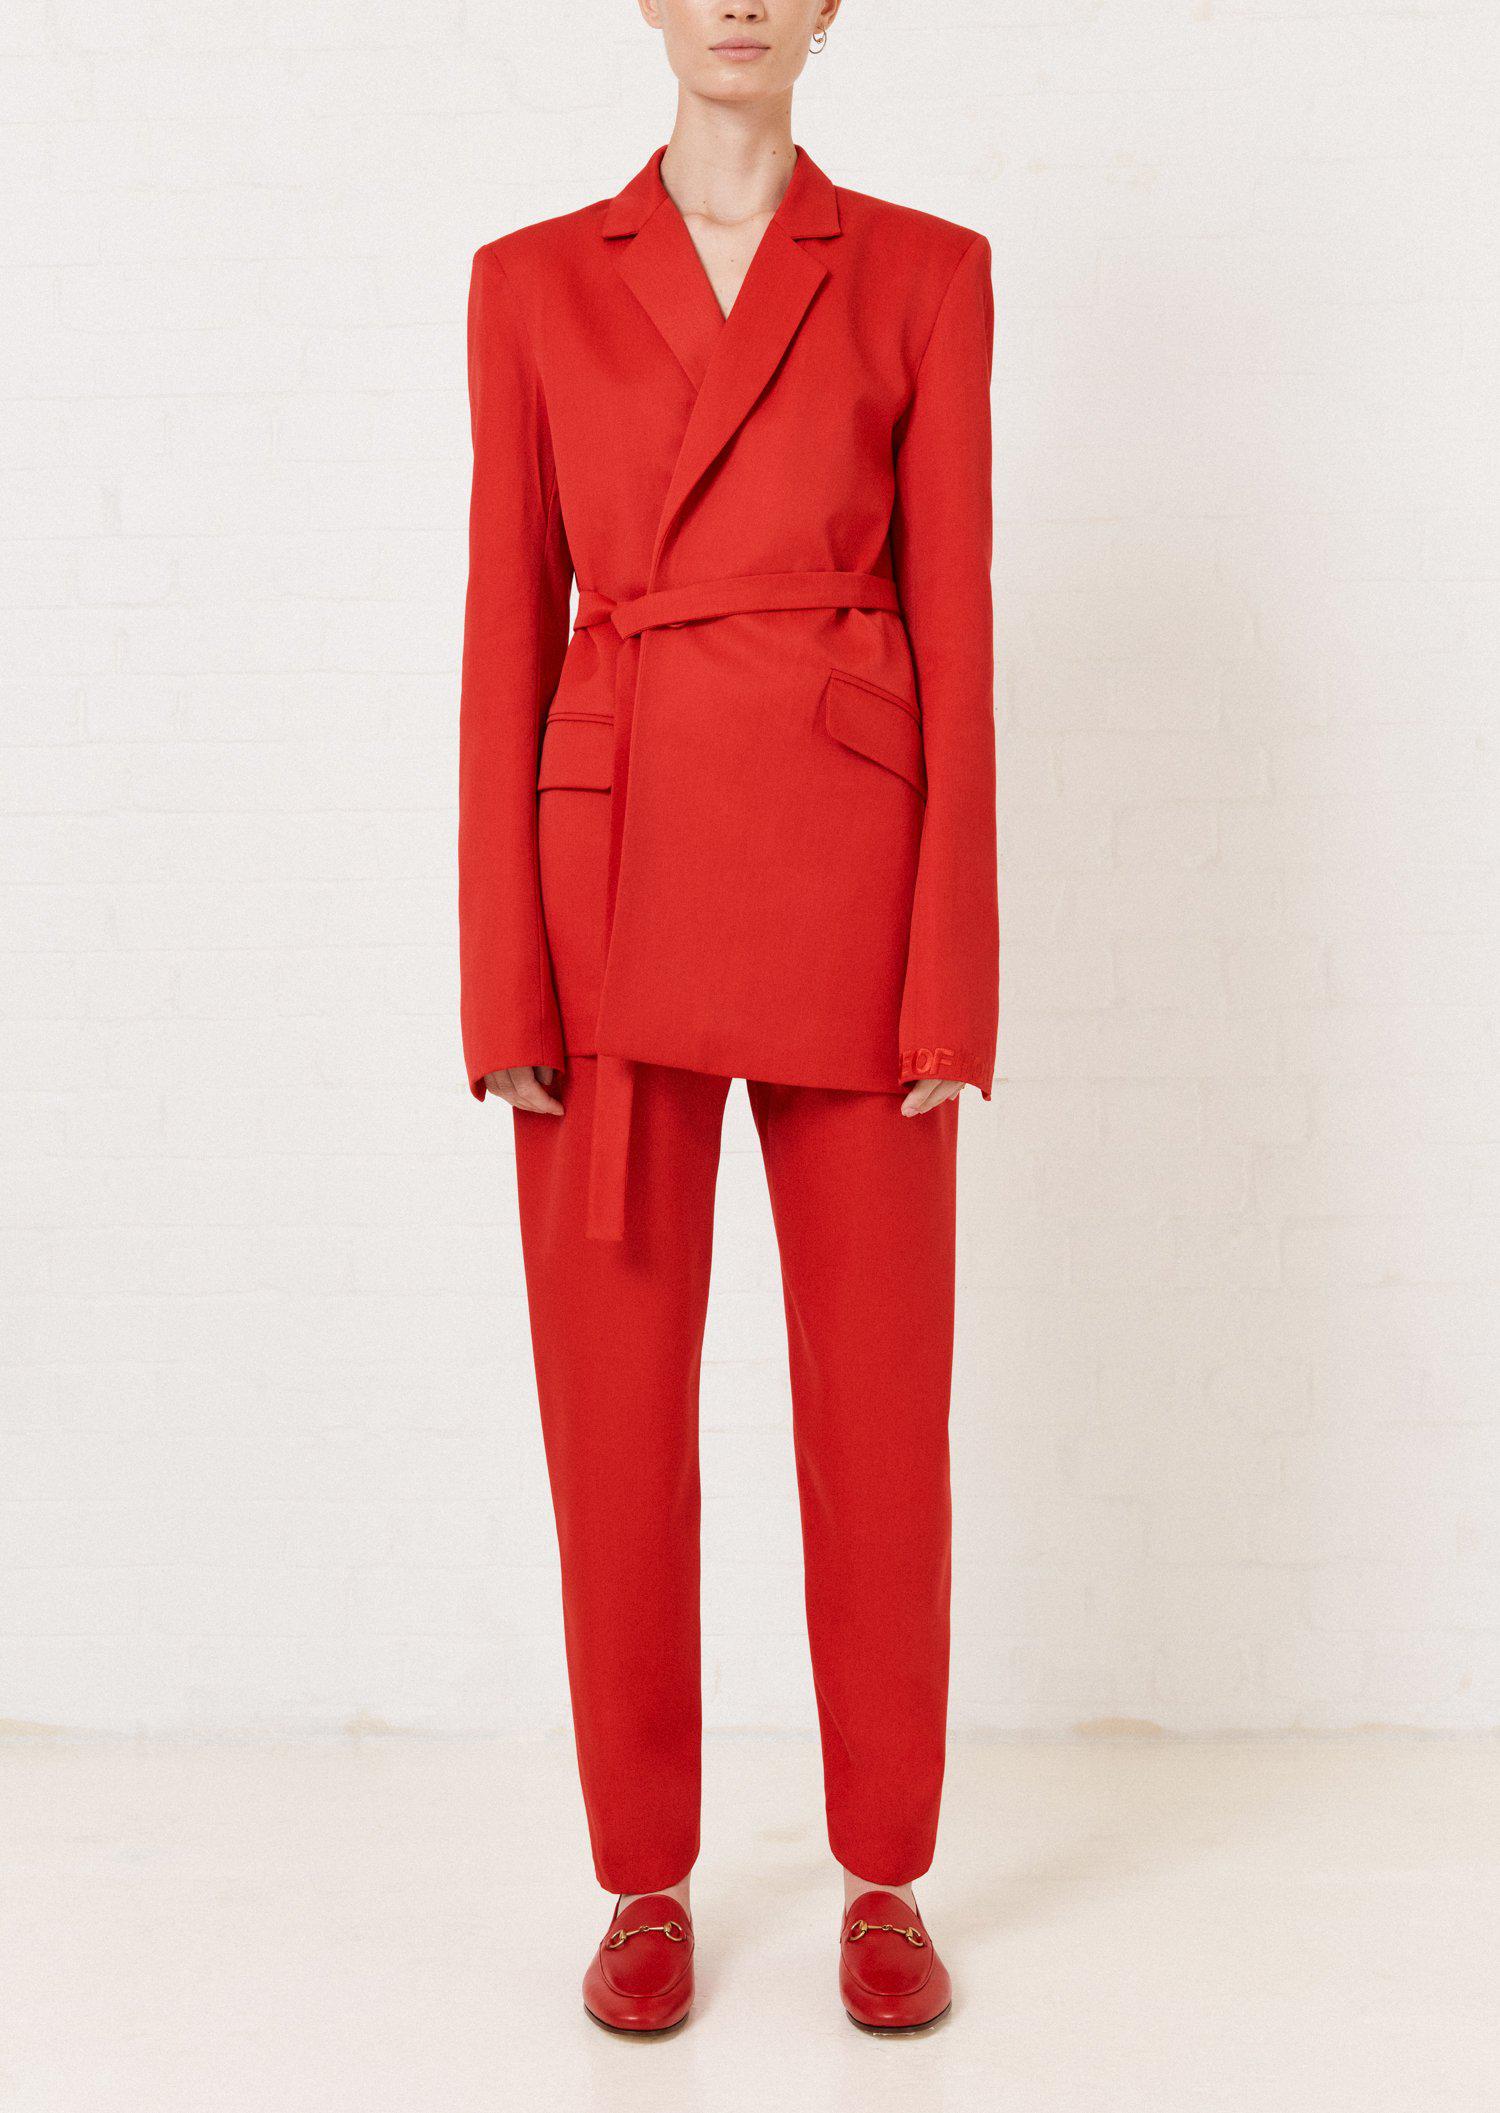 House of Holland Red Tailored Suit Jacket, Plain Pattern | Lyst